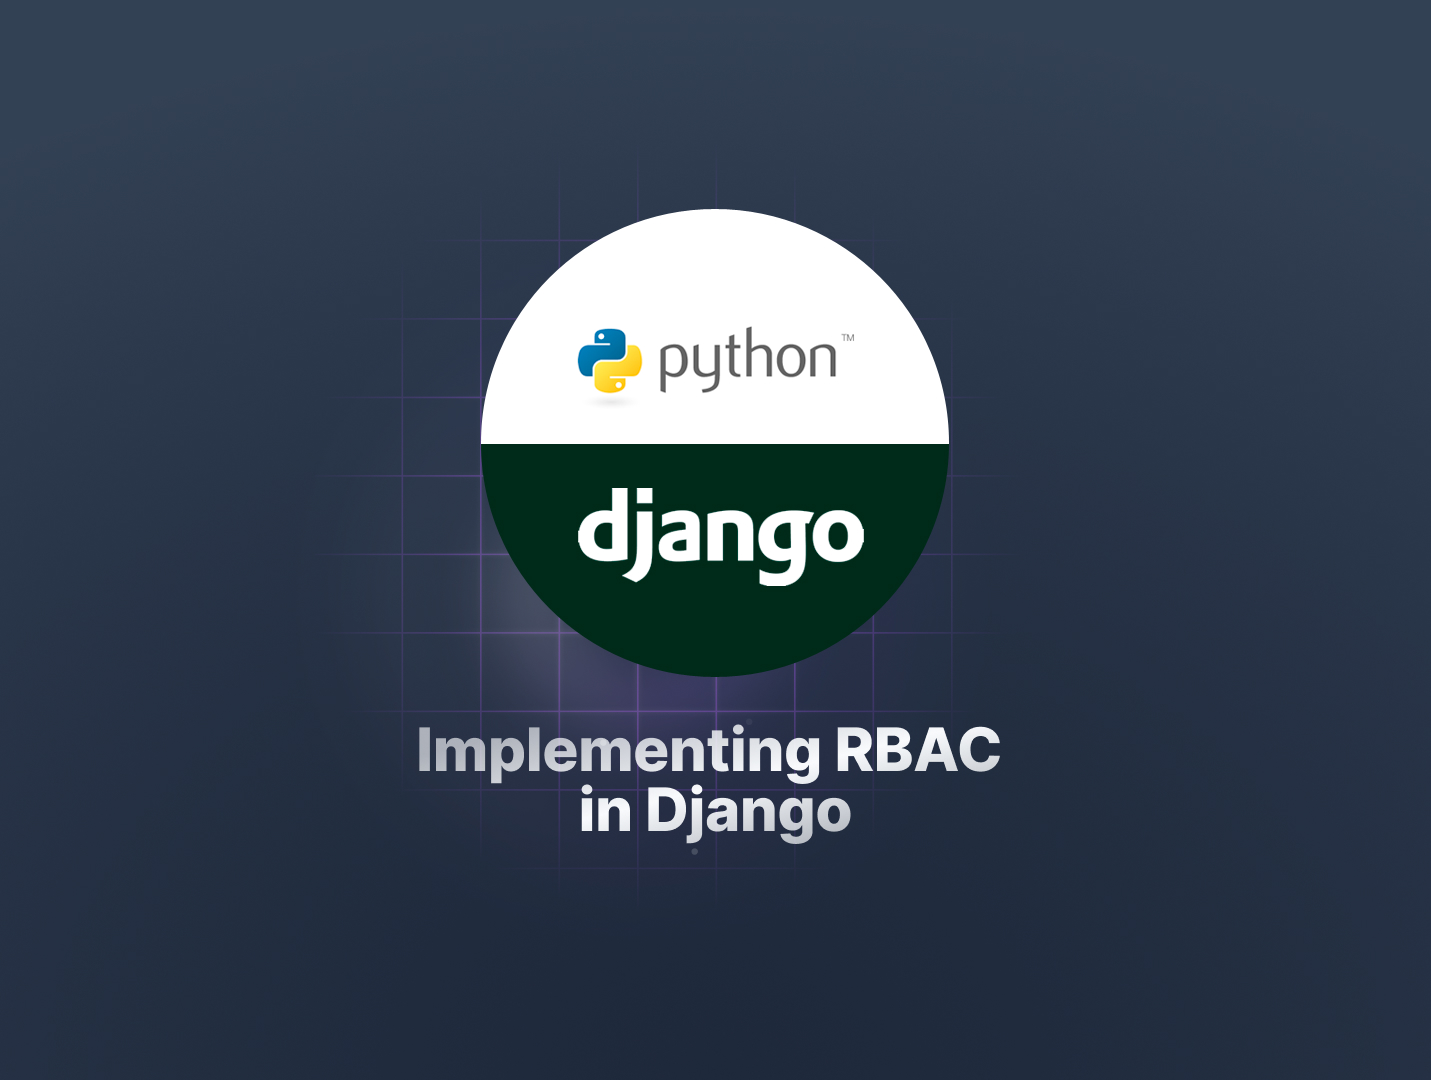 Implementing Role-Based Access Control in Django